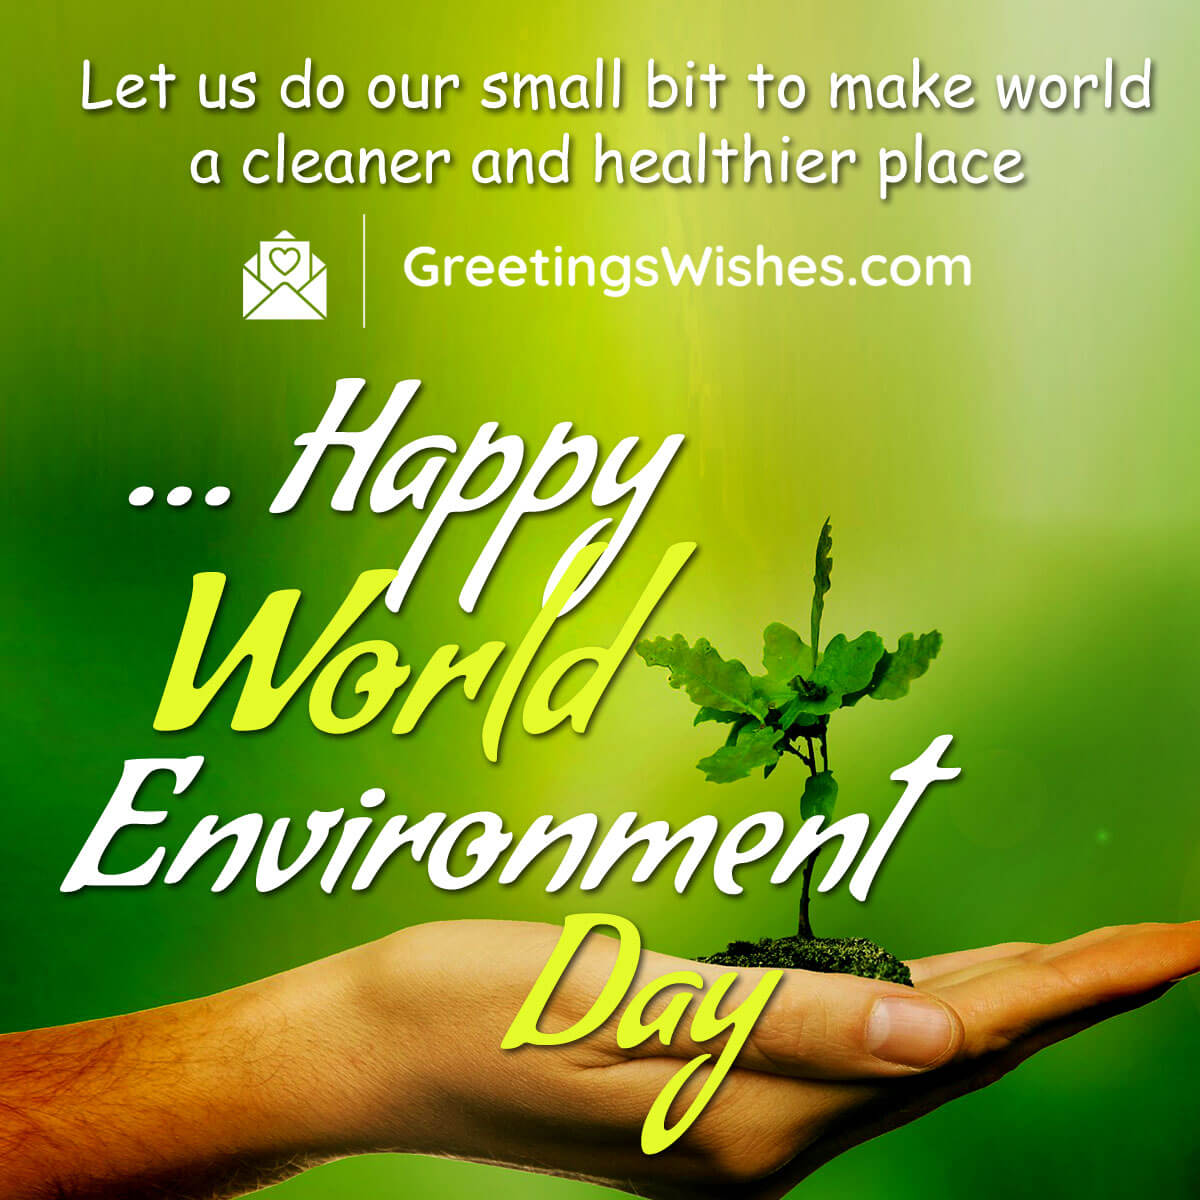 World Environment Day Picture